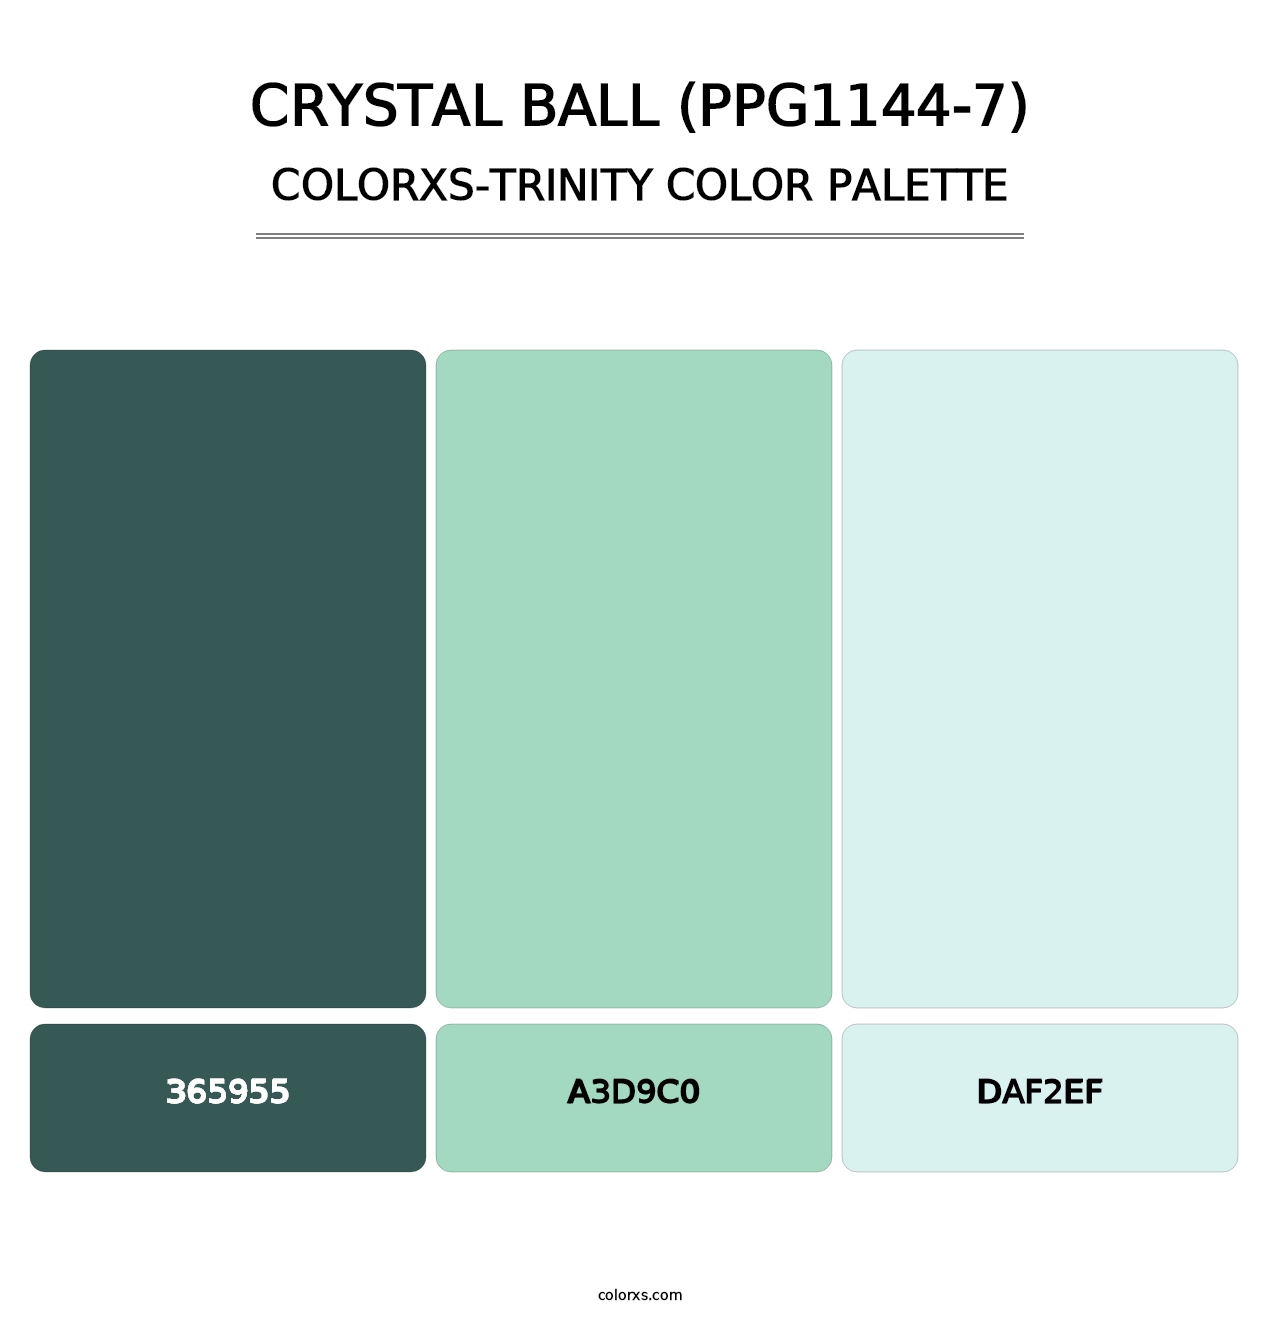 Crystal Ball (PPG1144-7) - Colorxs Trinity Palette